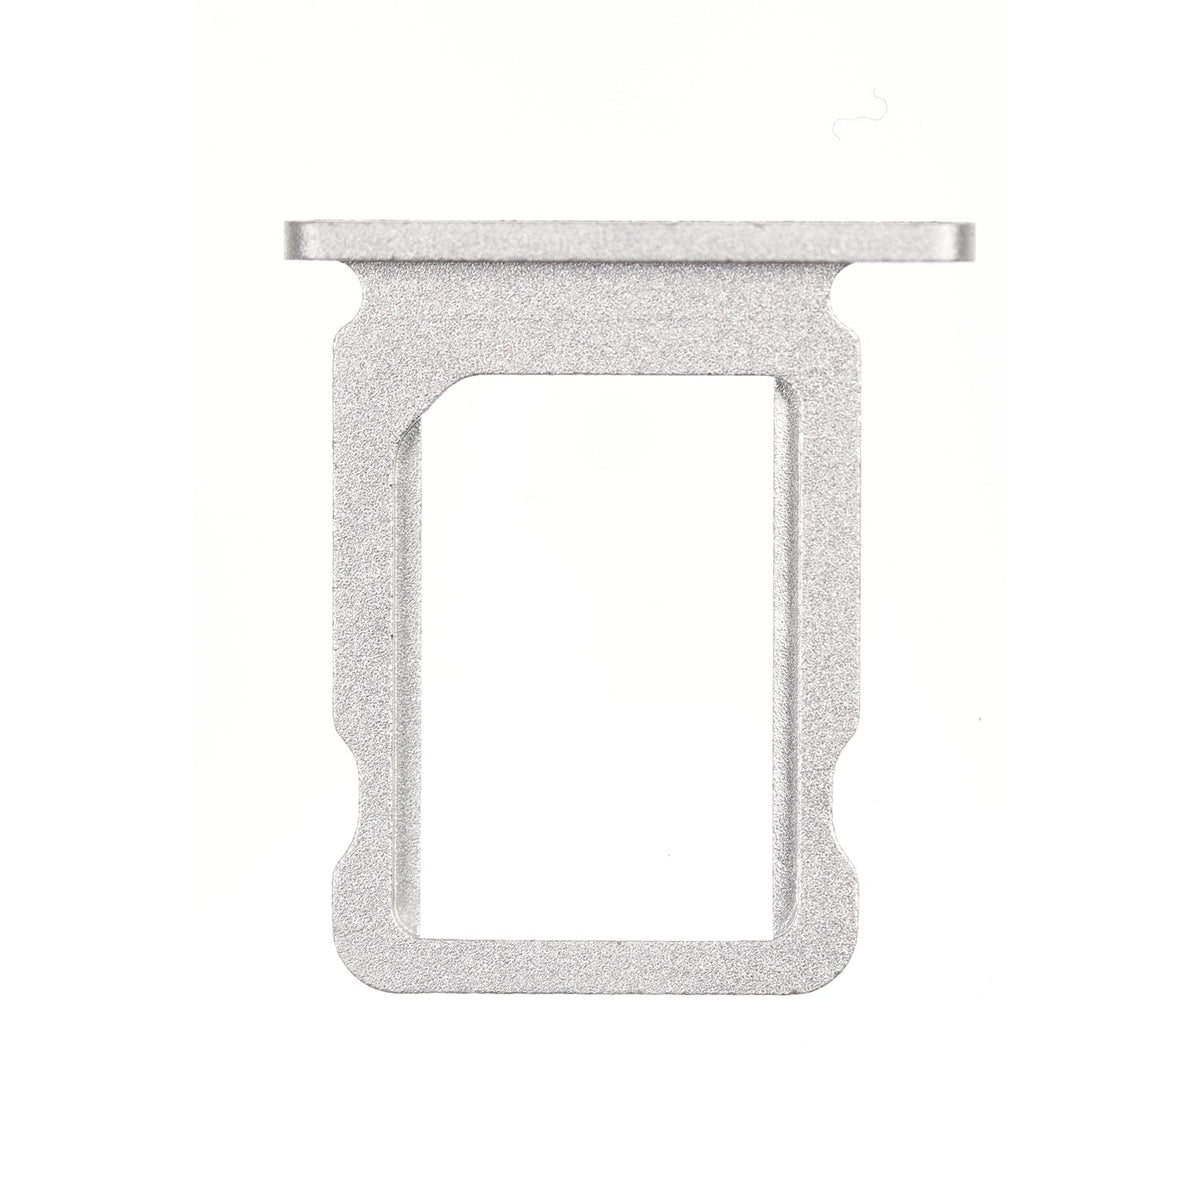 SIM CARD TRAY FOR IPAD PRO 11" 1ST - SILVER